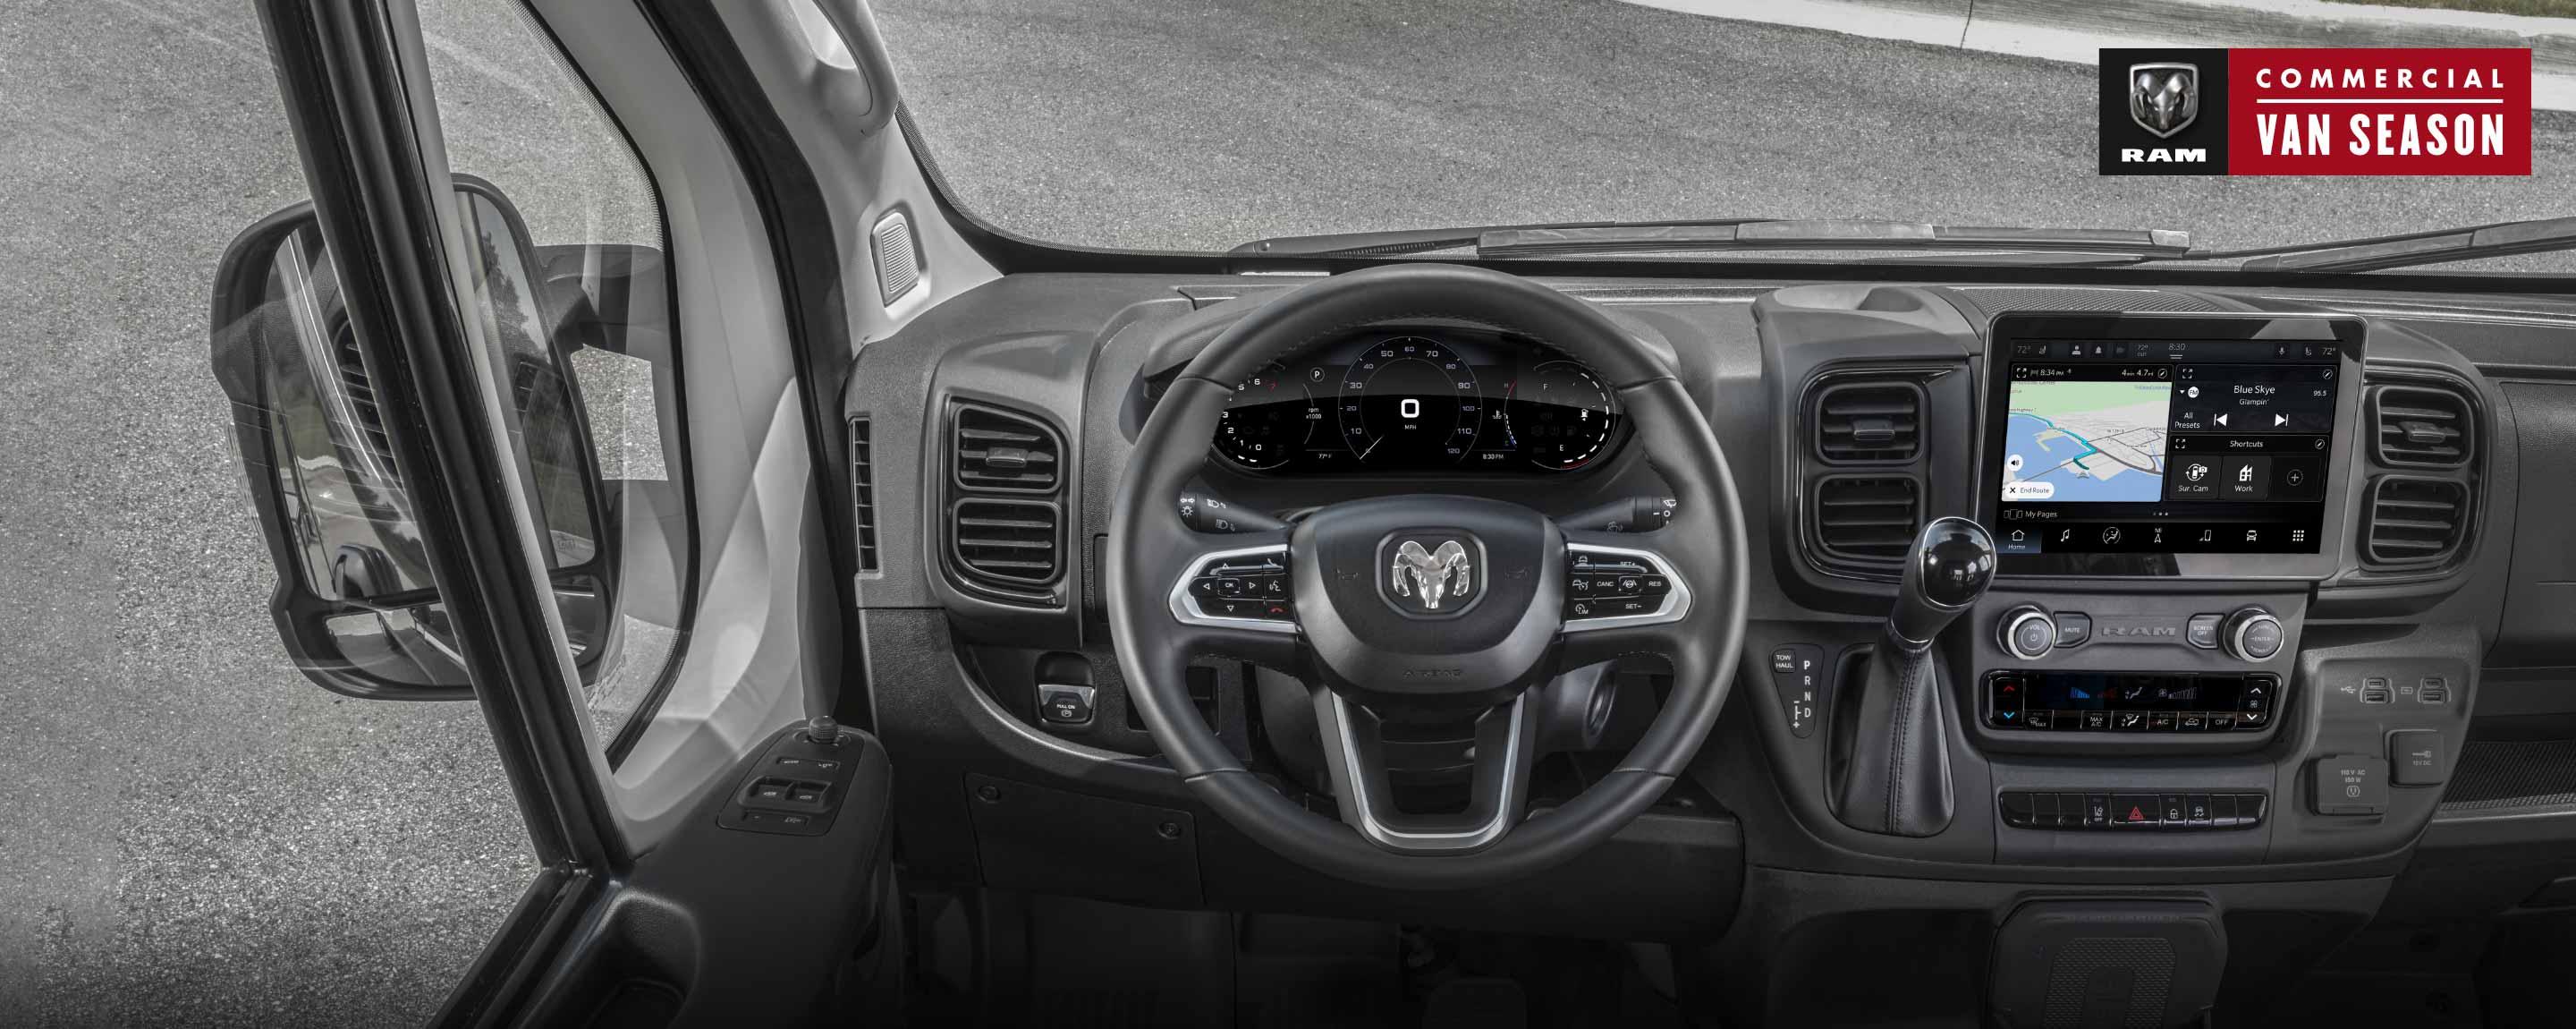 Ram Commercial Van Season. The interior of the 2022 Ram ProMaster, focusing on the steering wheel, climate controls and touchscreen.